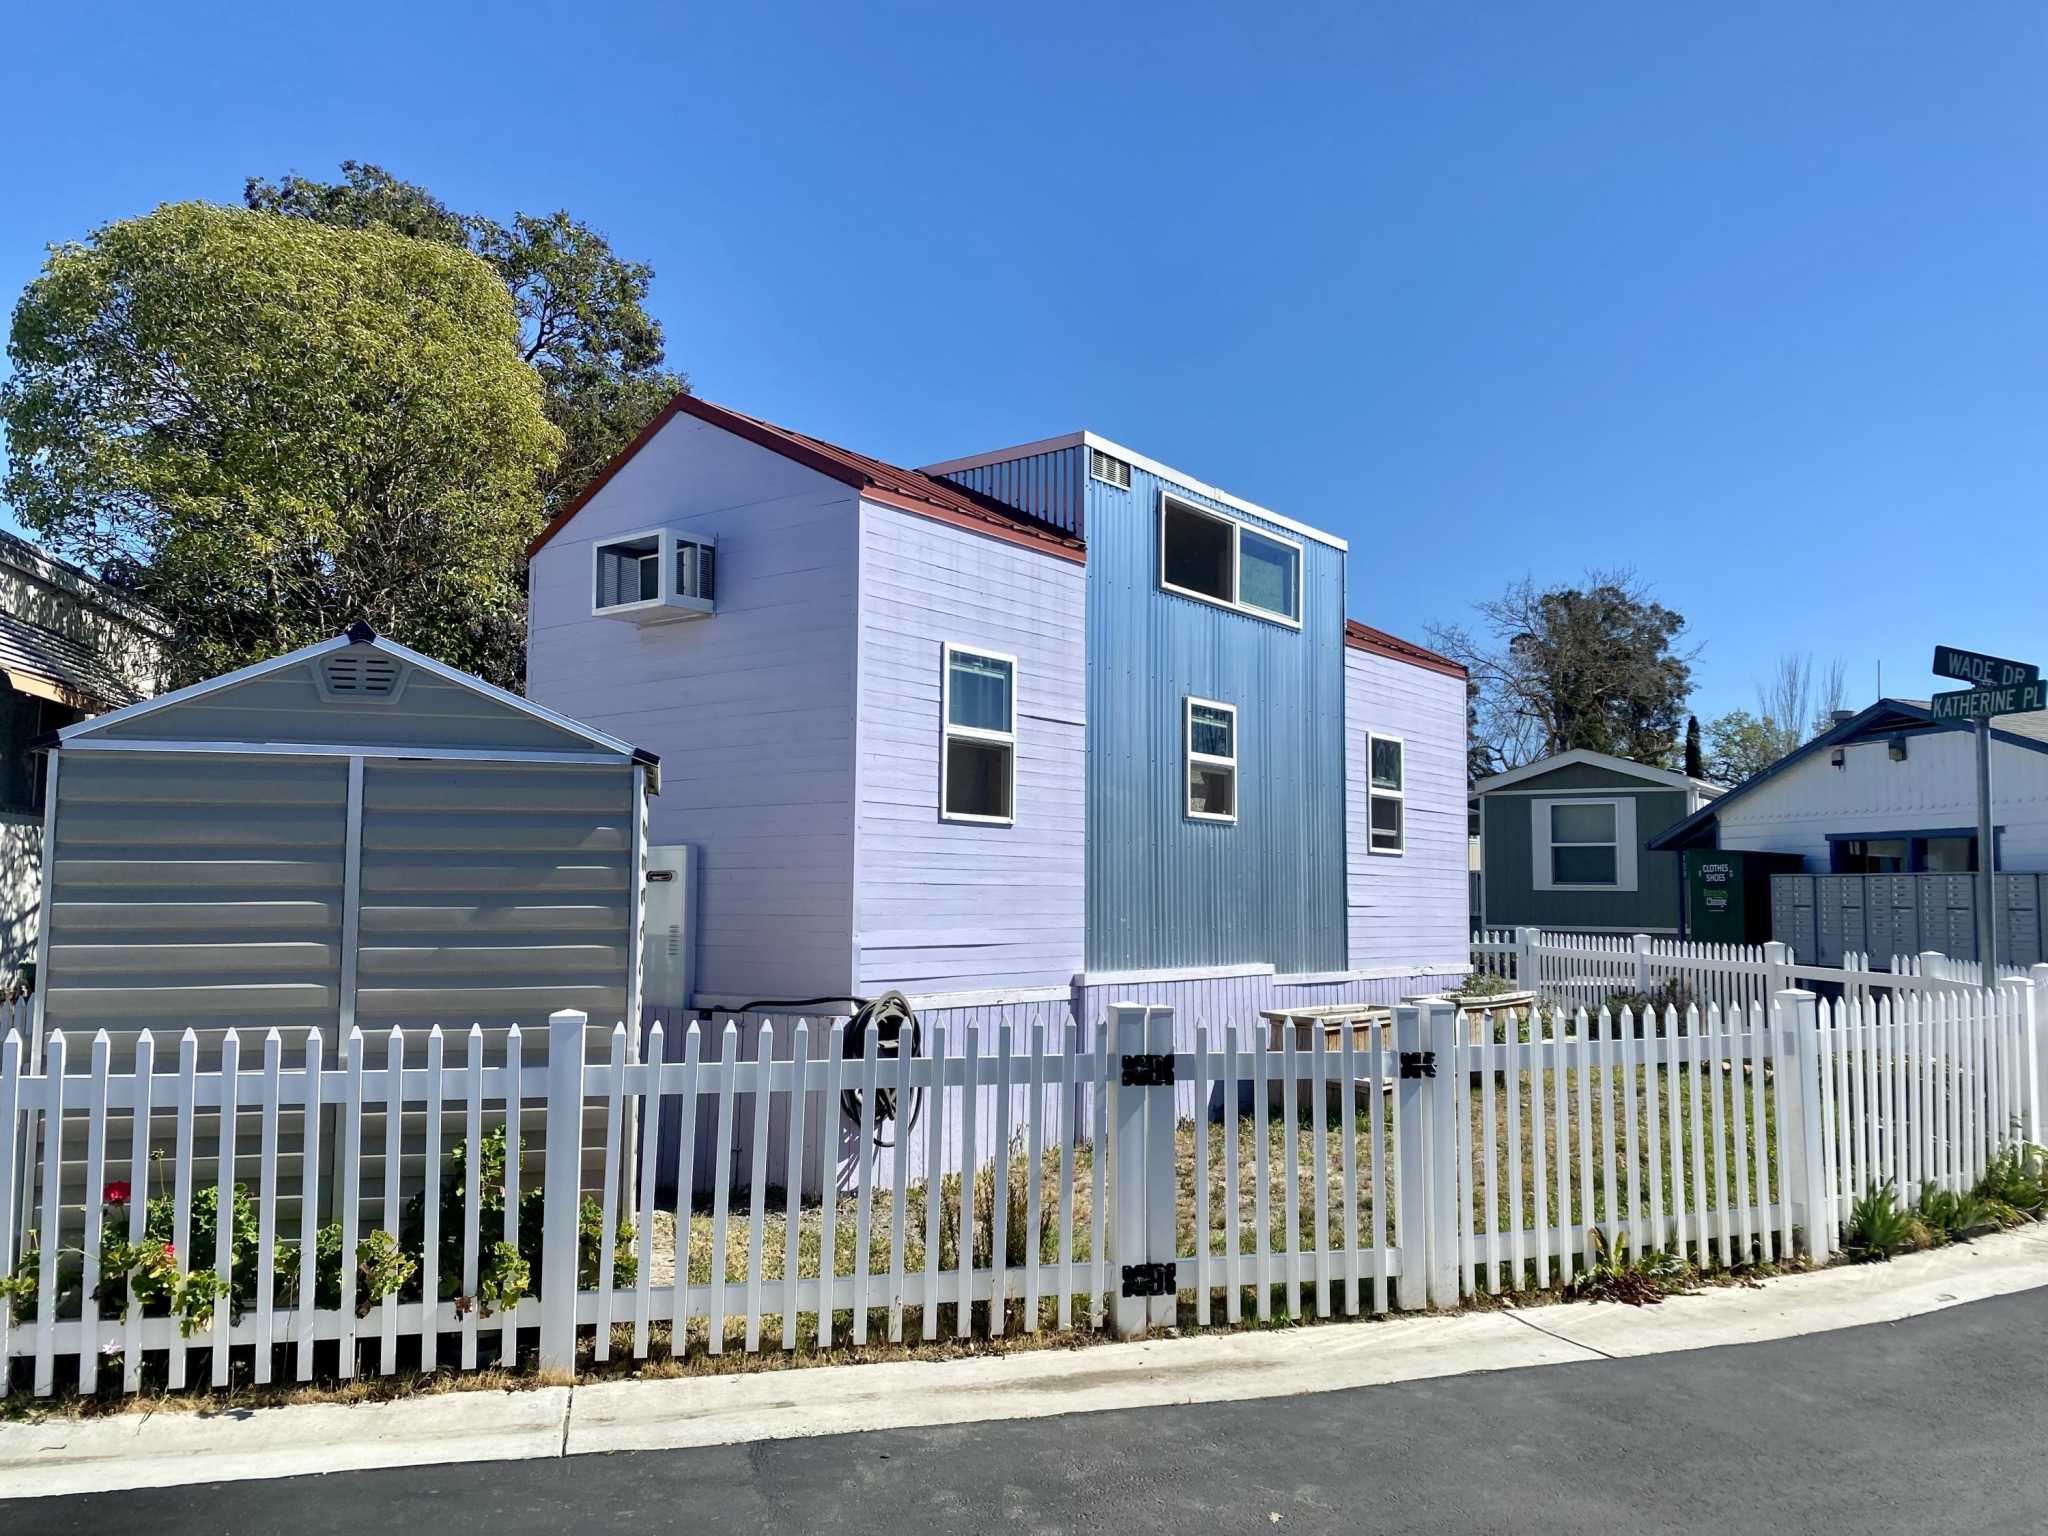 Tiny houses beginning to make an impact in East Bay